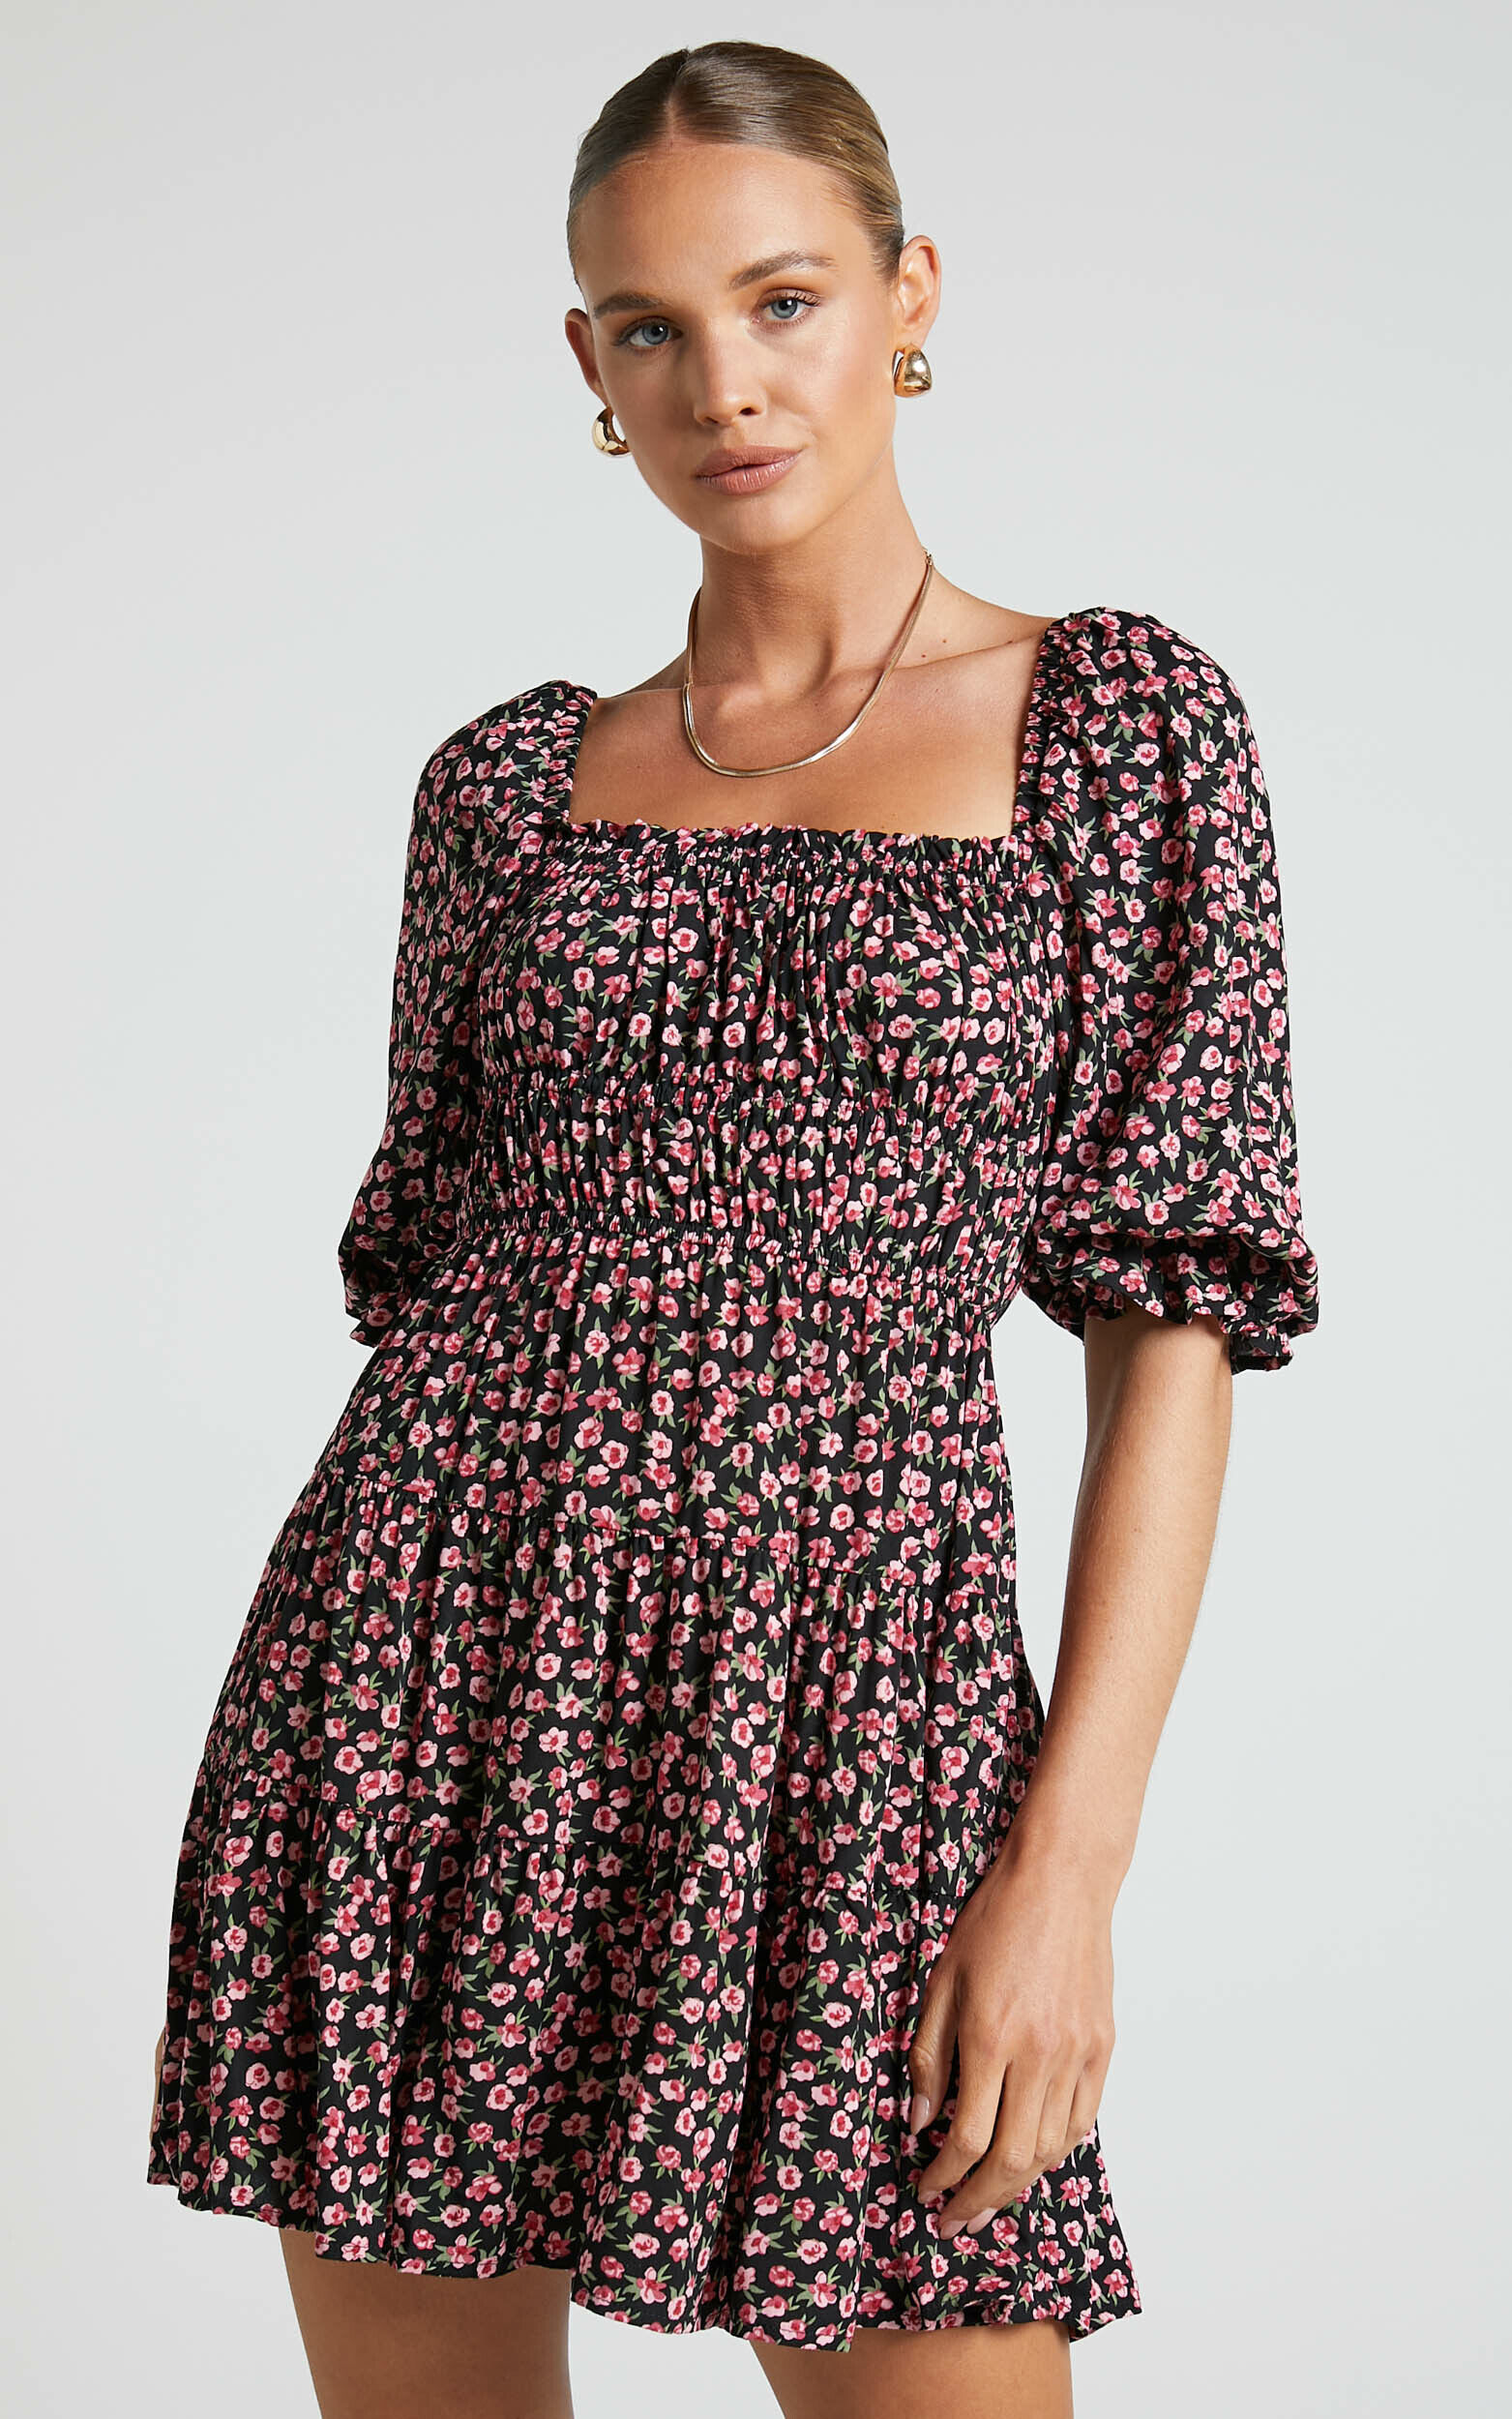 Zaley Mini Dress - Ruched Bodice 3/4 Puff Sleeve Dress in Black Floral - 04, BLK1